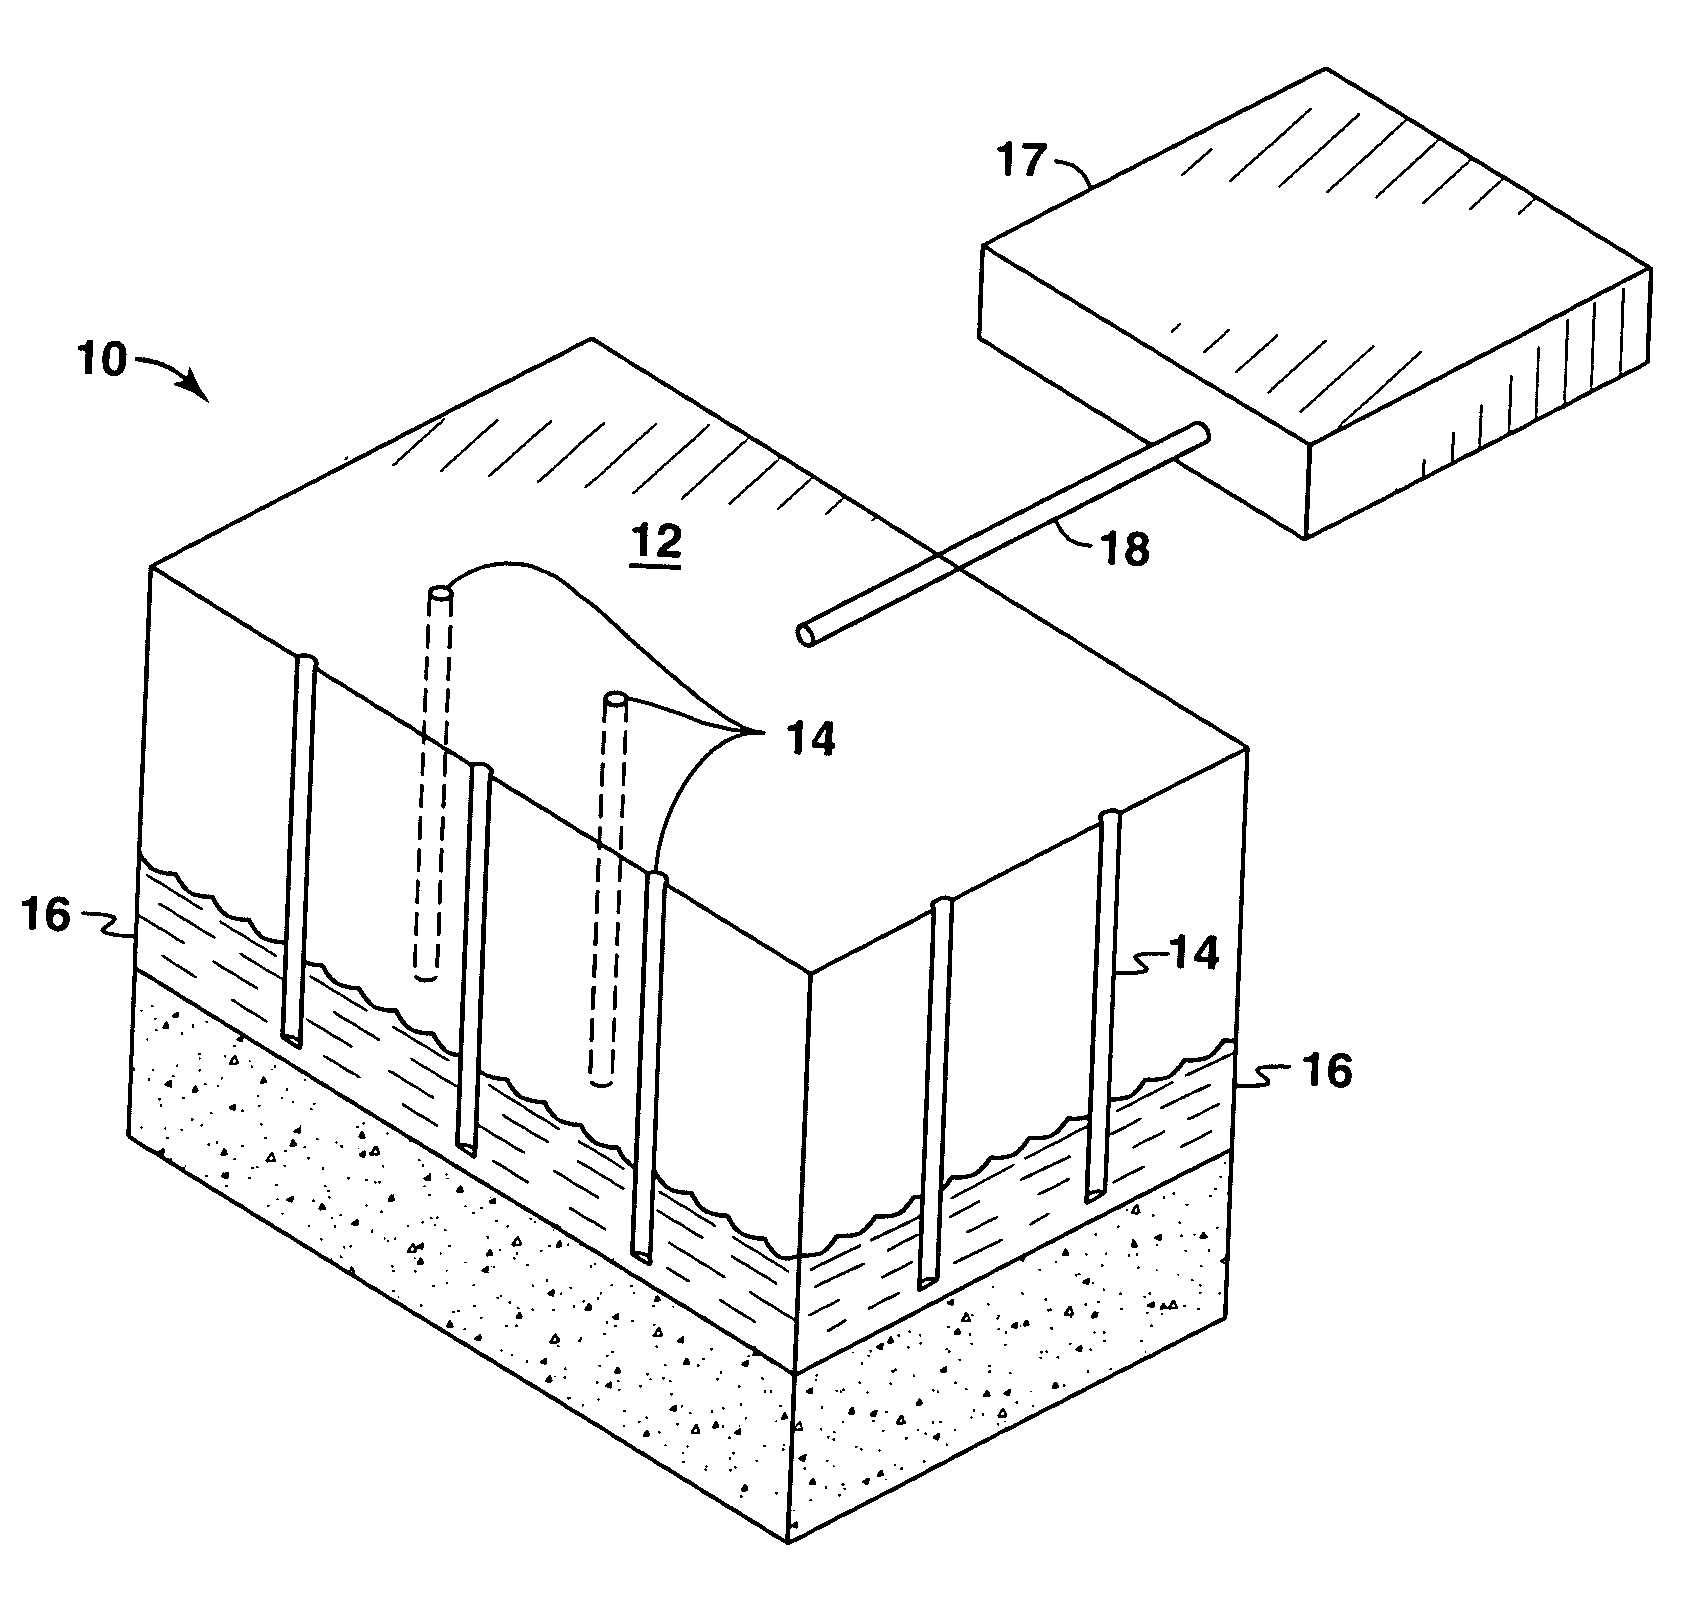 Process for producing Hydrocarbon fluids combining in situ heating, a power plant and a gas plant